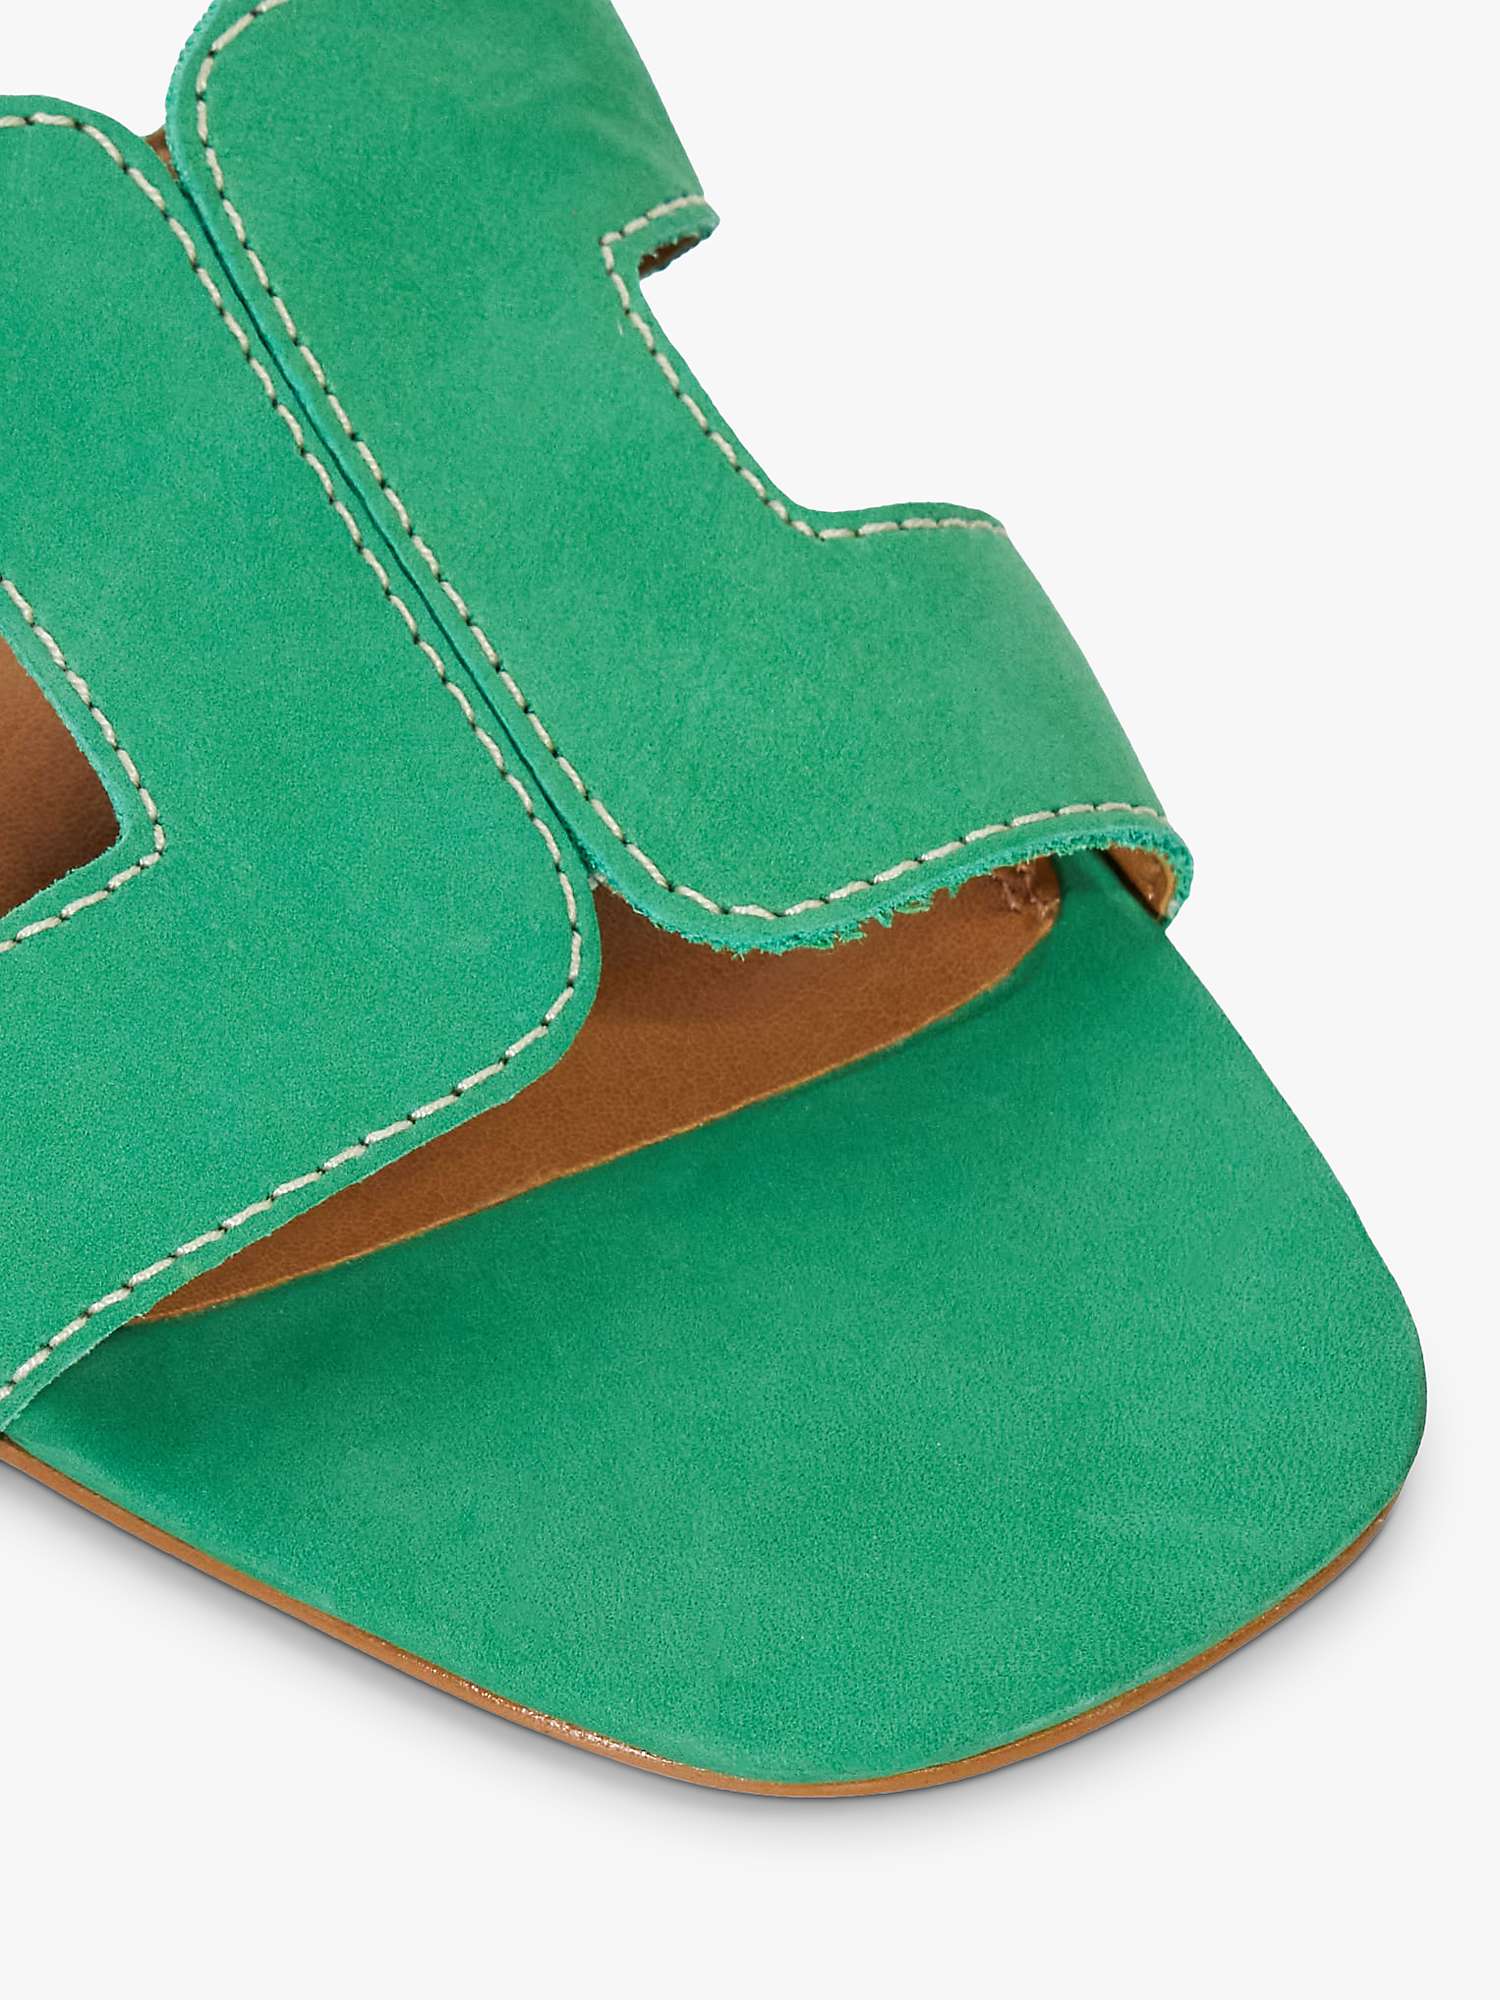 Buy Dune Loupe Suede Sandals, Green Online at johnlewis.com